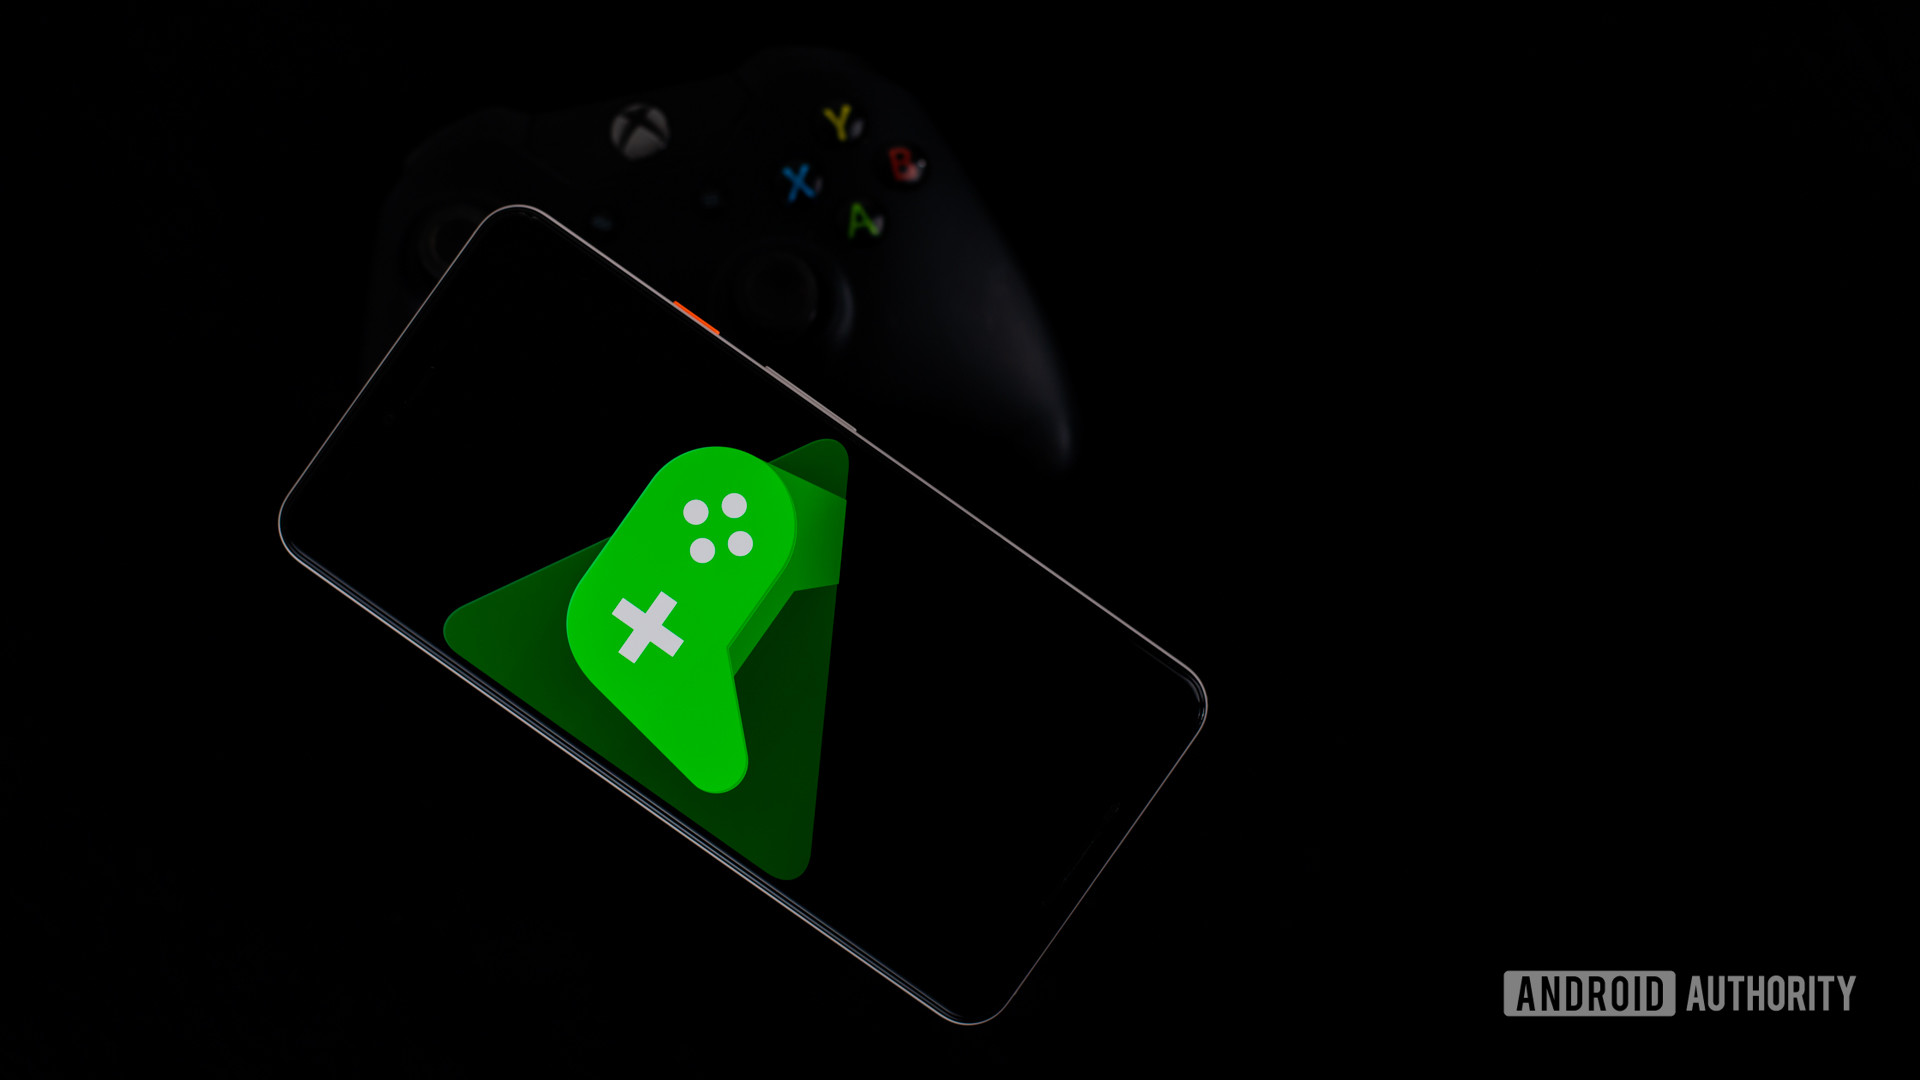 Google Play Games on smartphone with controller stock photo 4